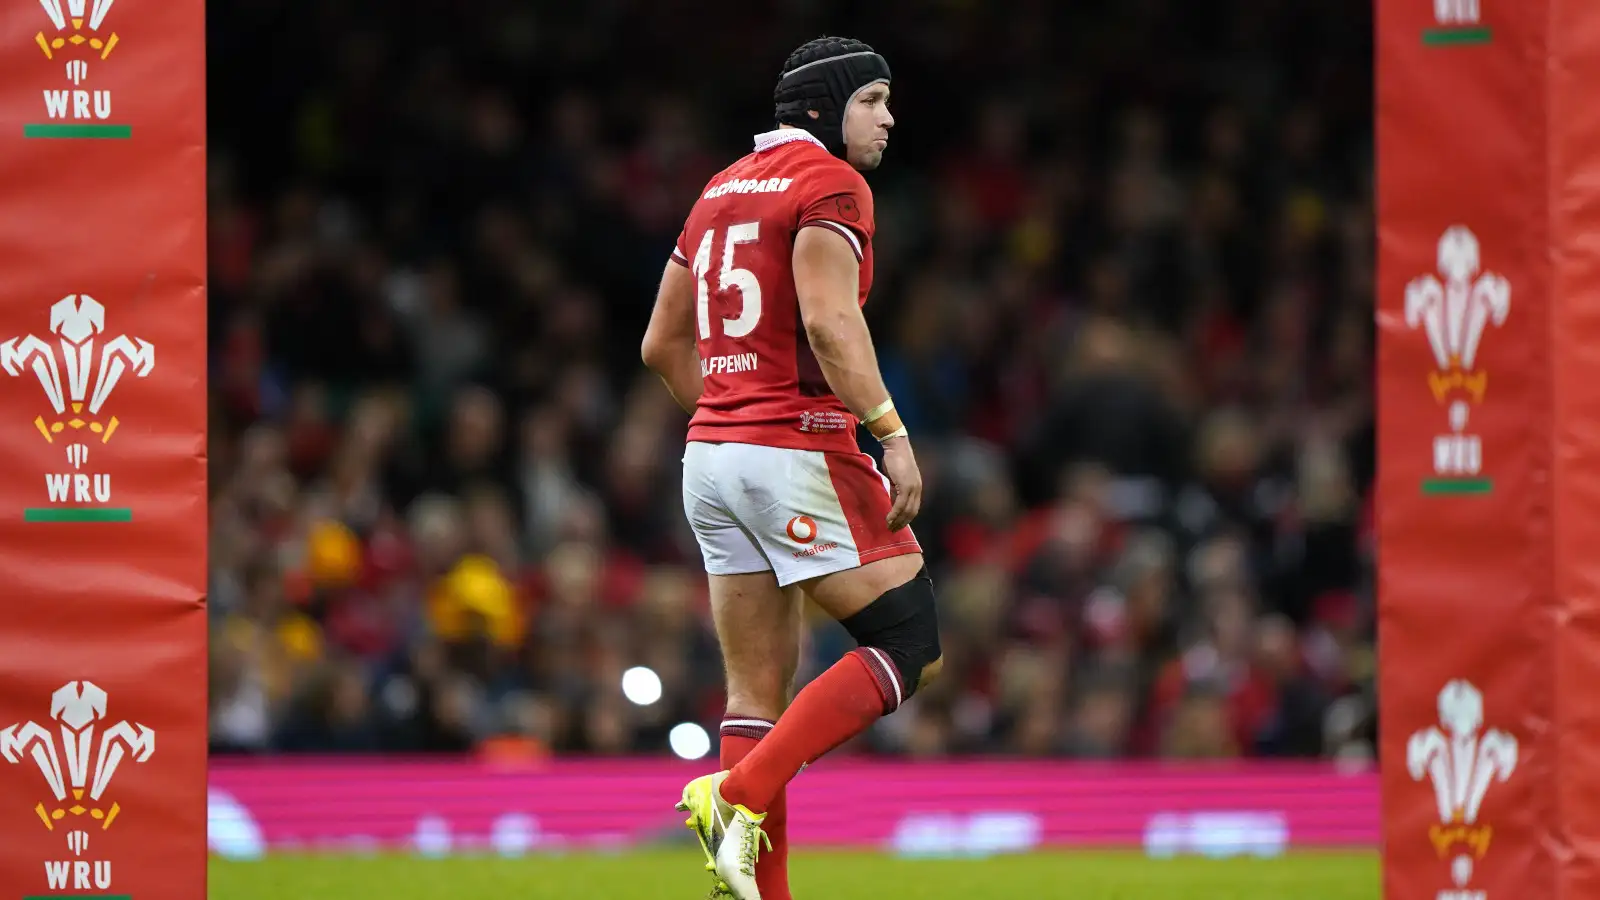 Leigh Halfpenny in his final game for Wales.